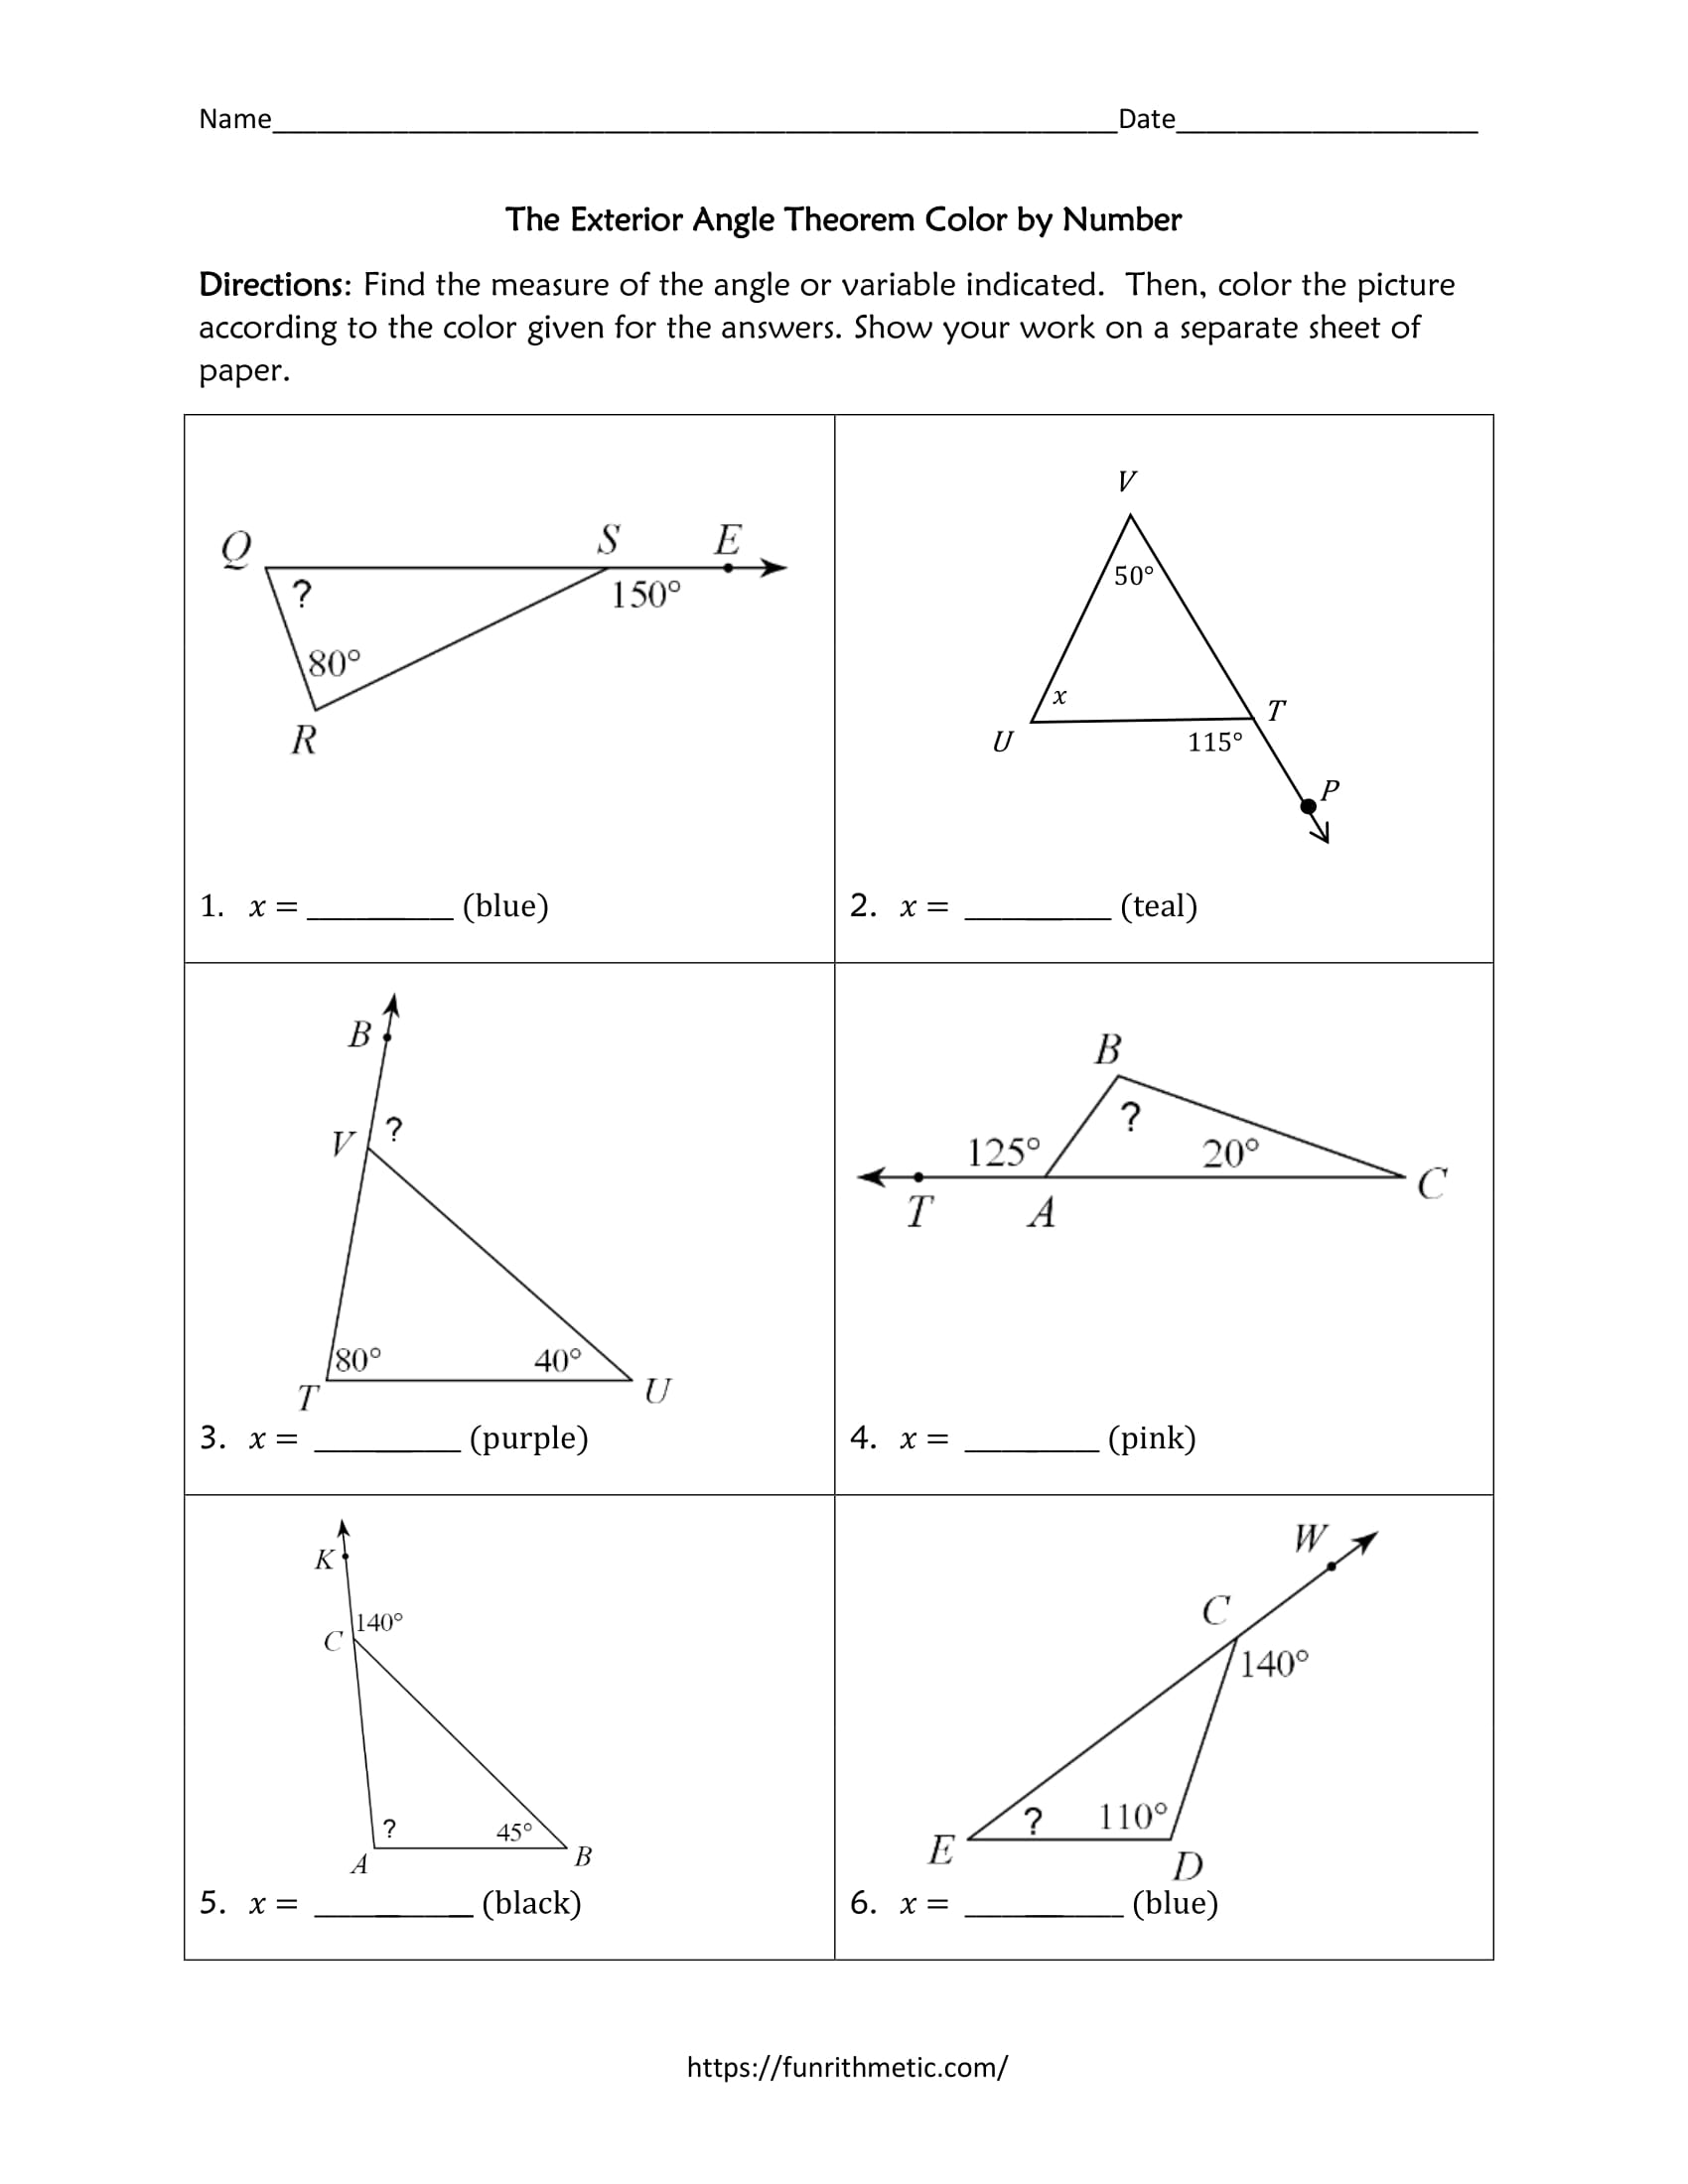 Exterior Angle Theorem Color by Number With Regard To Exterior Angle Theorem Worksheet